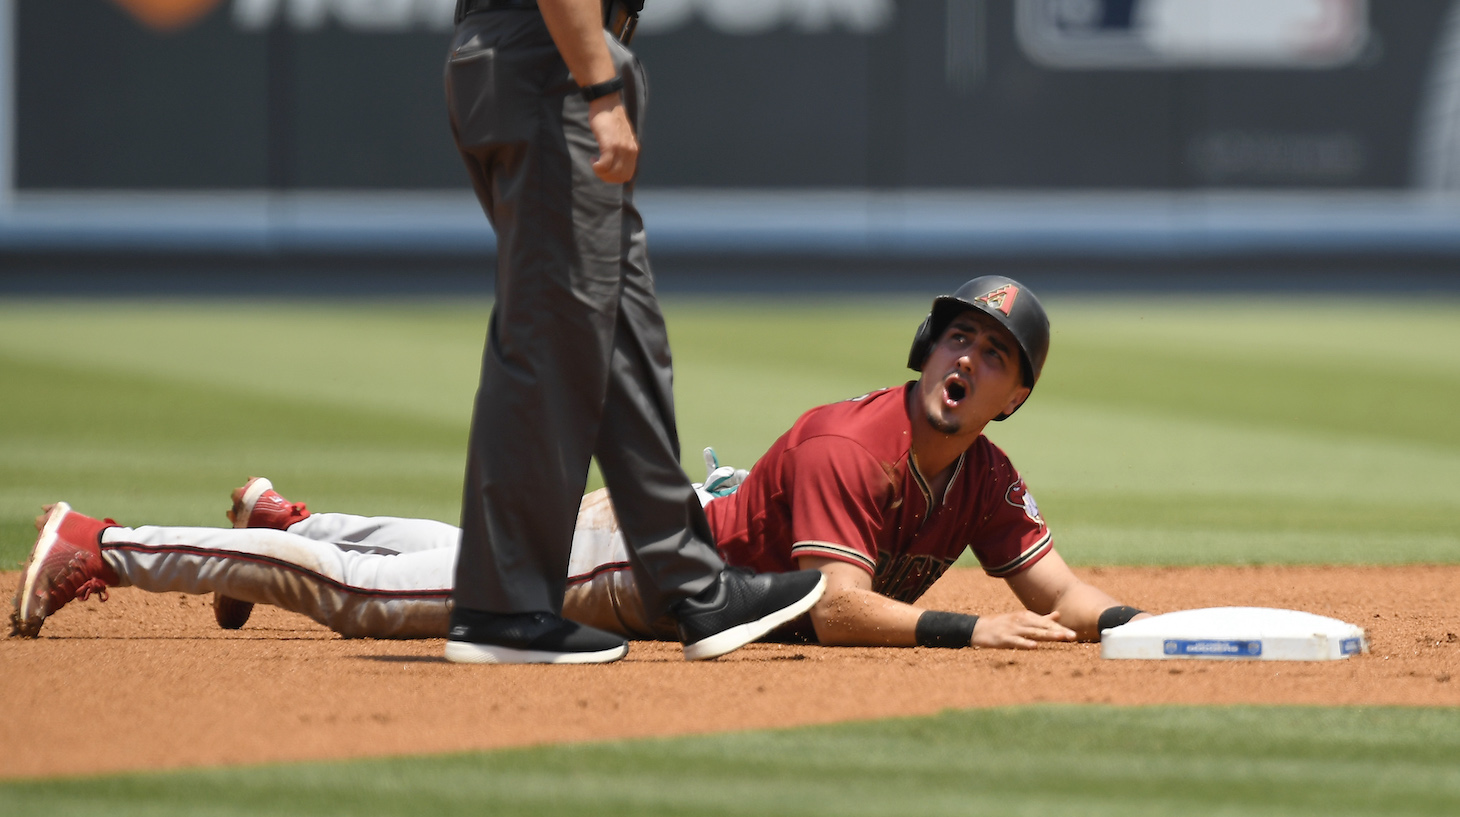 LOS ANGELES, CA - JULY 11: Josh Rojas #10 of the Arizona Diamondbacks reacts to second base umpire Brian O'Nora #7 after he was called out trying to steal second base against the Los Angeles Dodgers during the first inning at Dodger Stadium on July 11, 2021 in Los Angeles, California. (Photo by Kevork Djansezian/Getty Images)